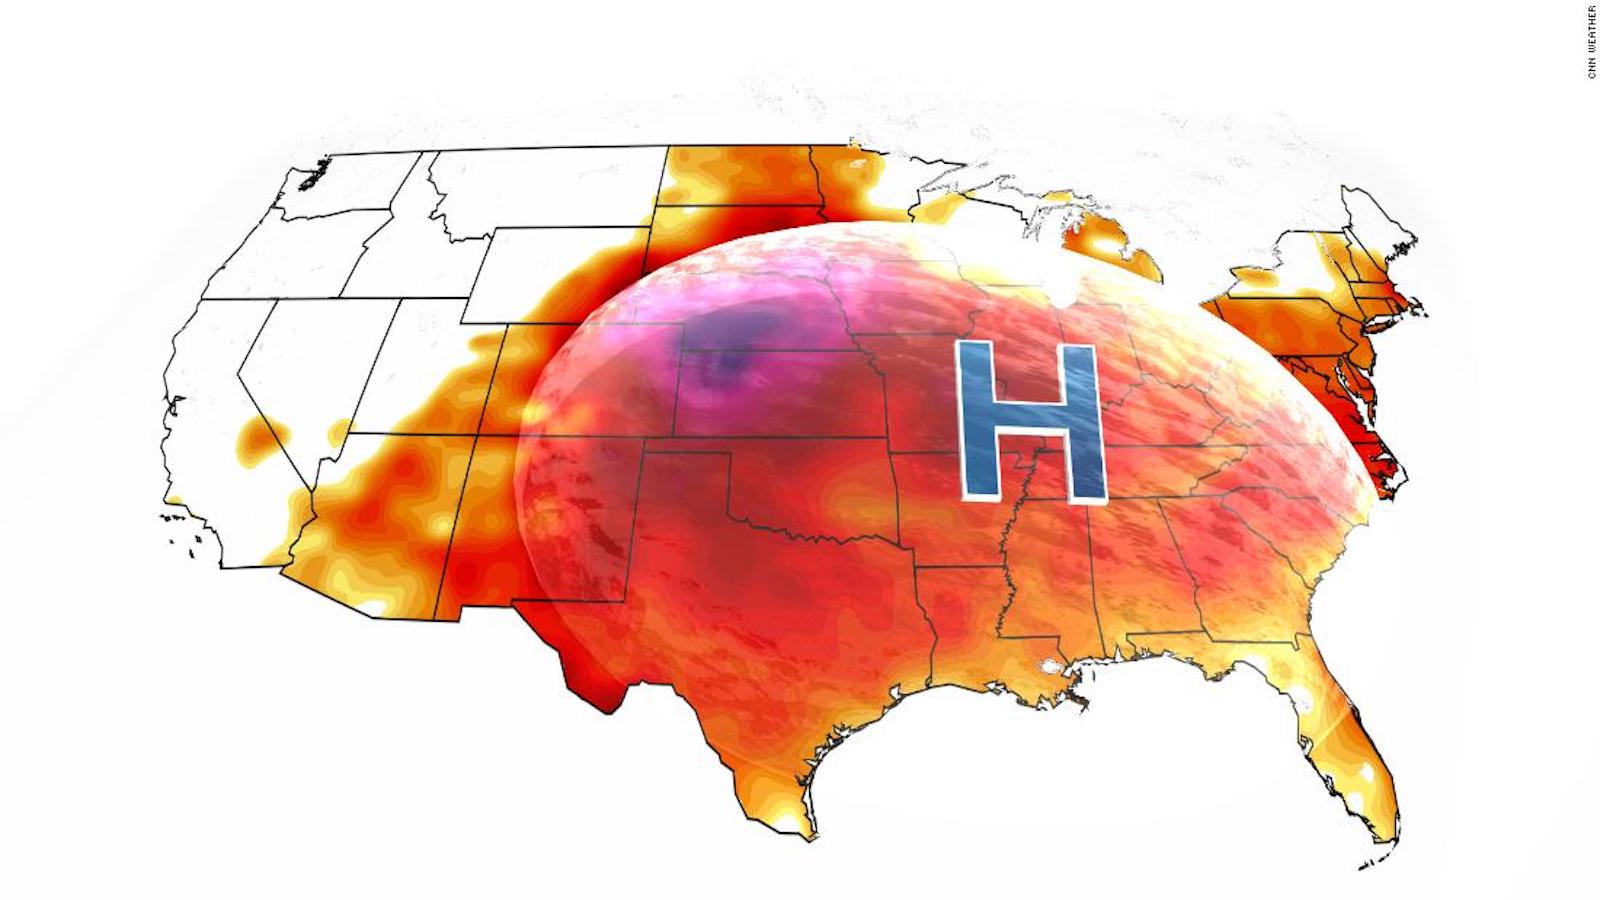 More than 125 million people are under heat alert in the United States